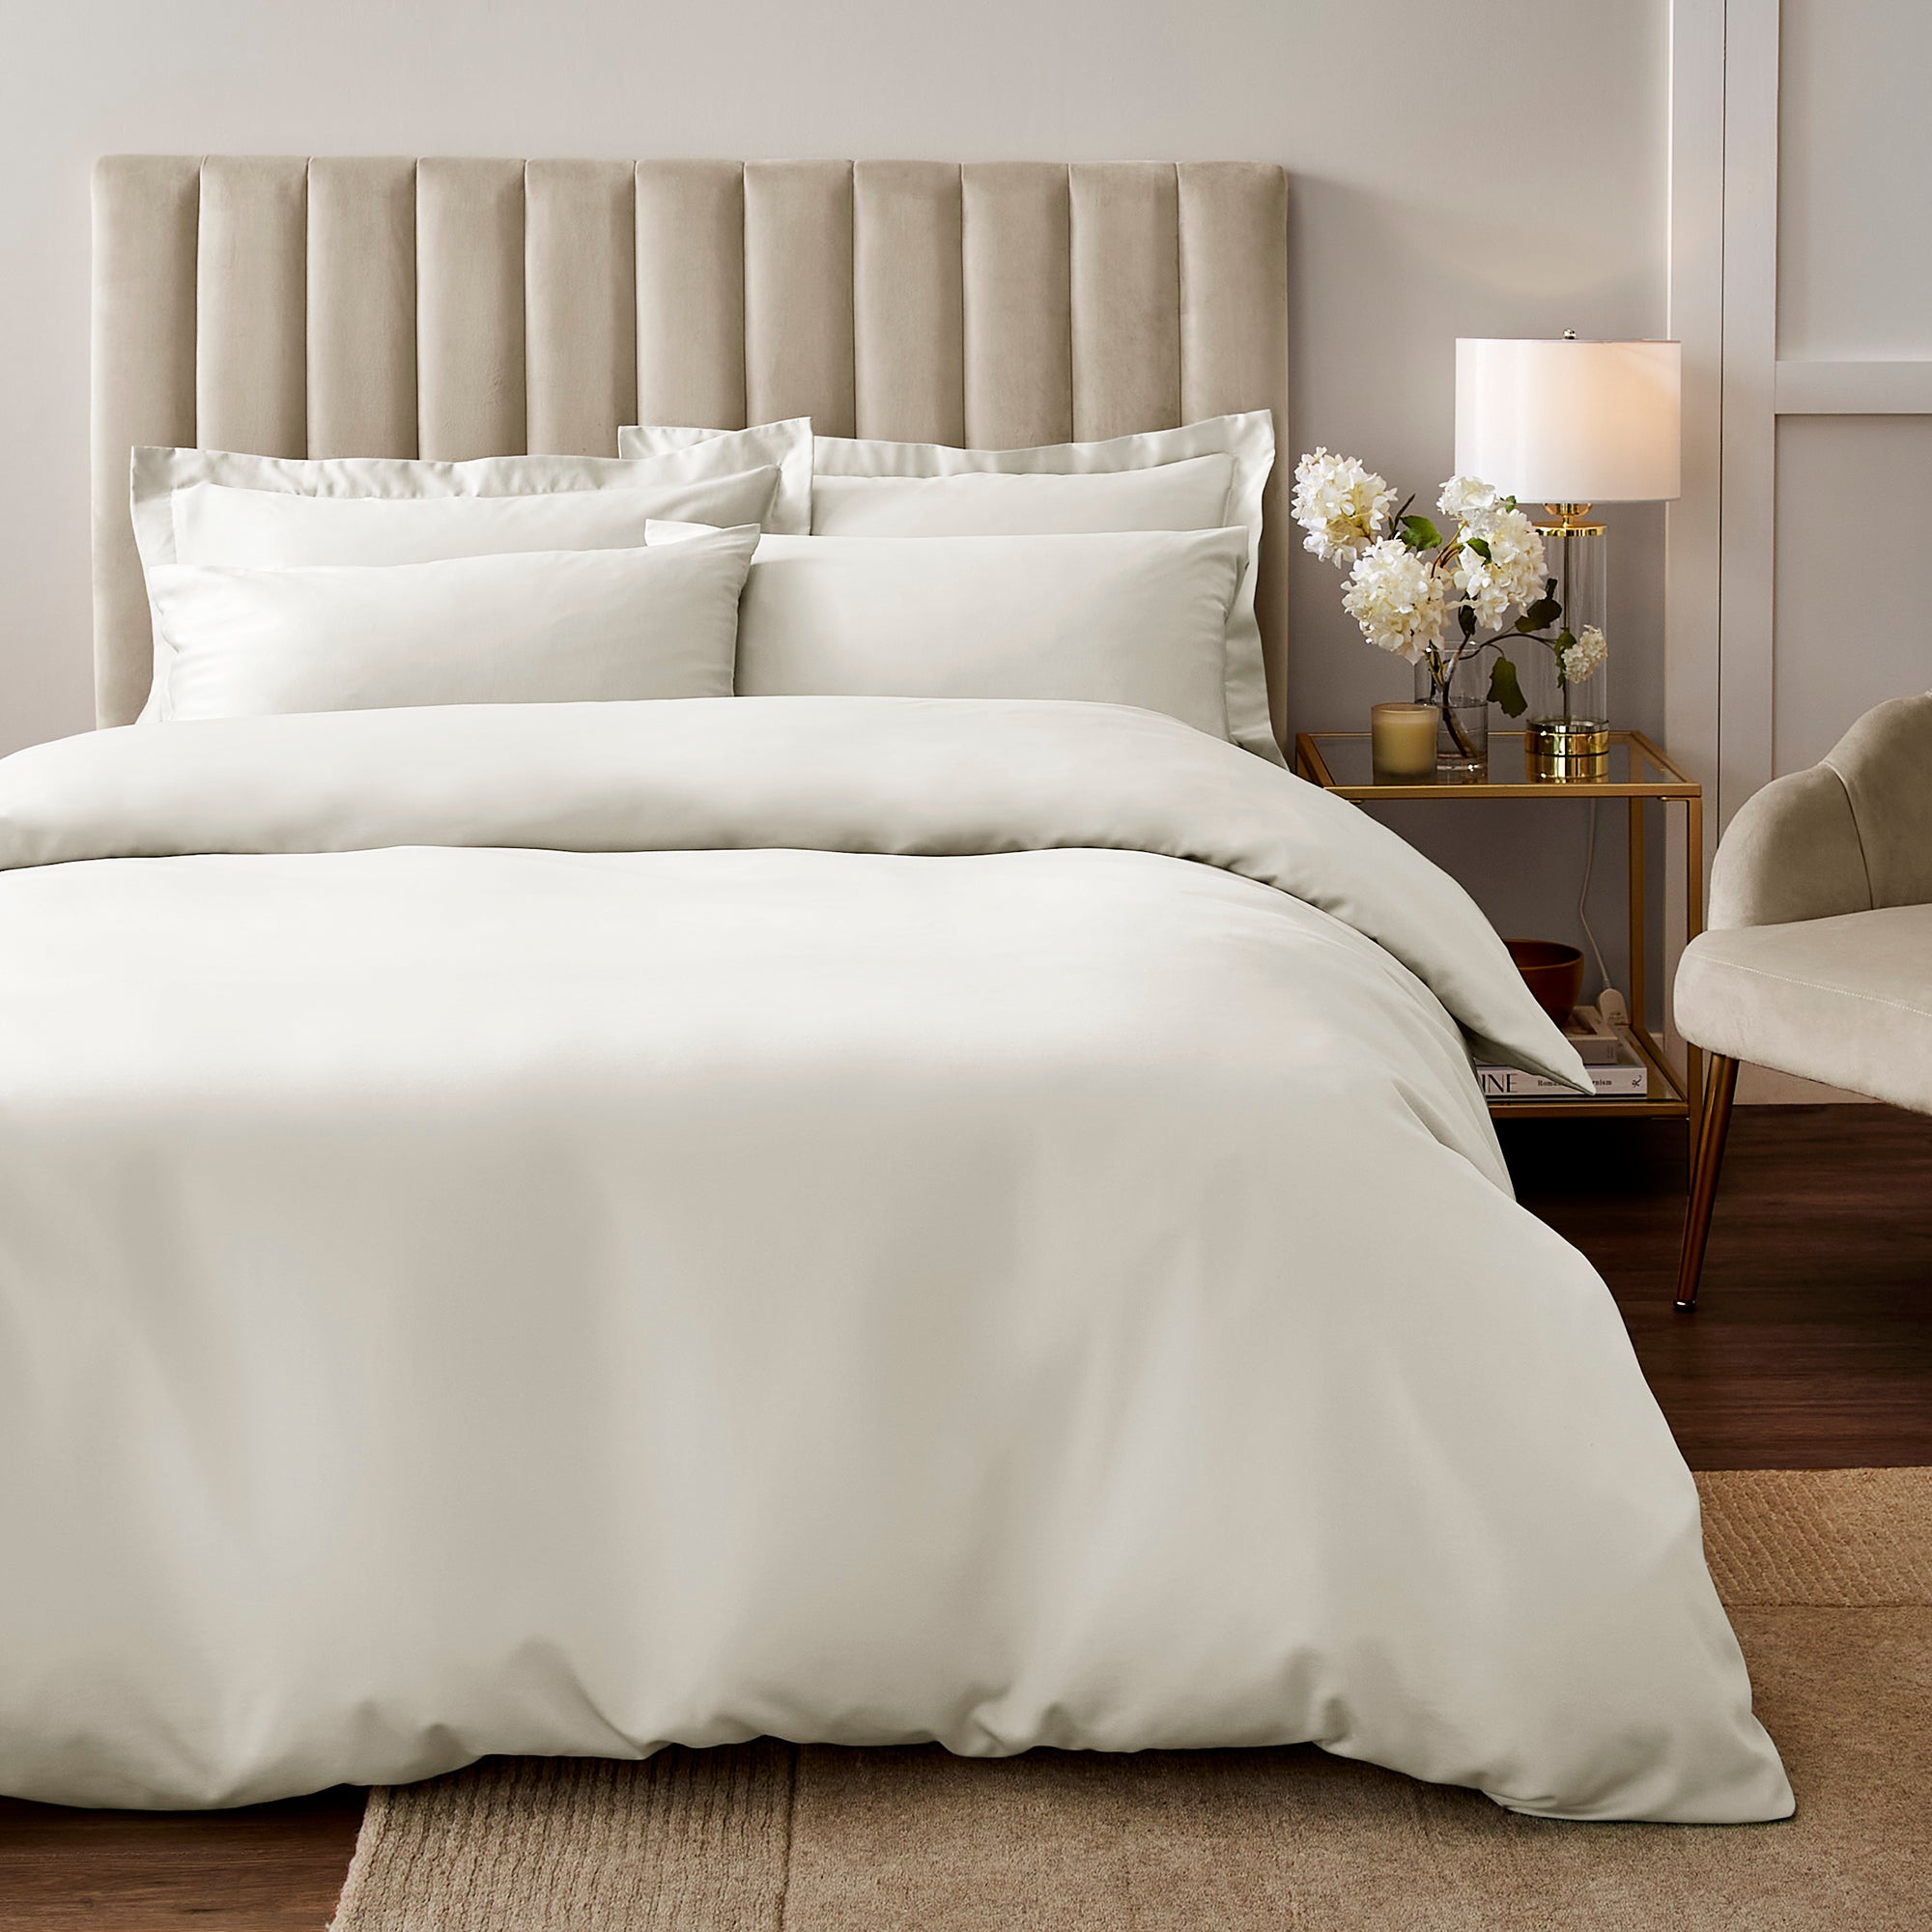 Soft Silky Duvet Cover And Pillowcase Set Ivory